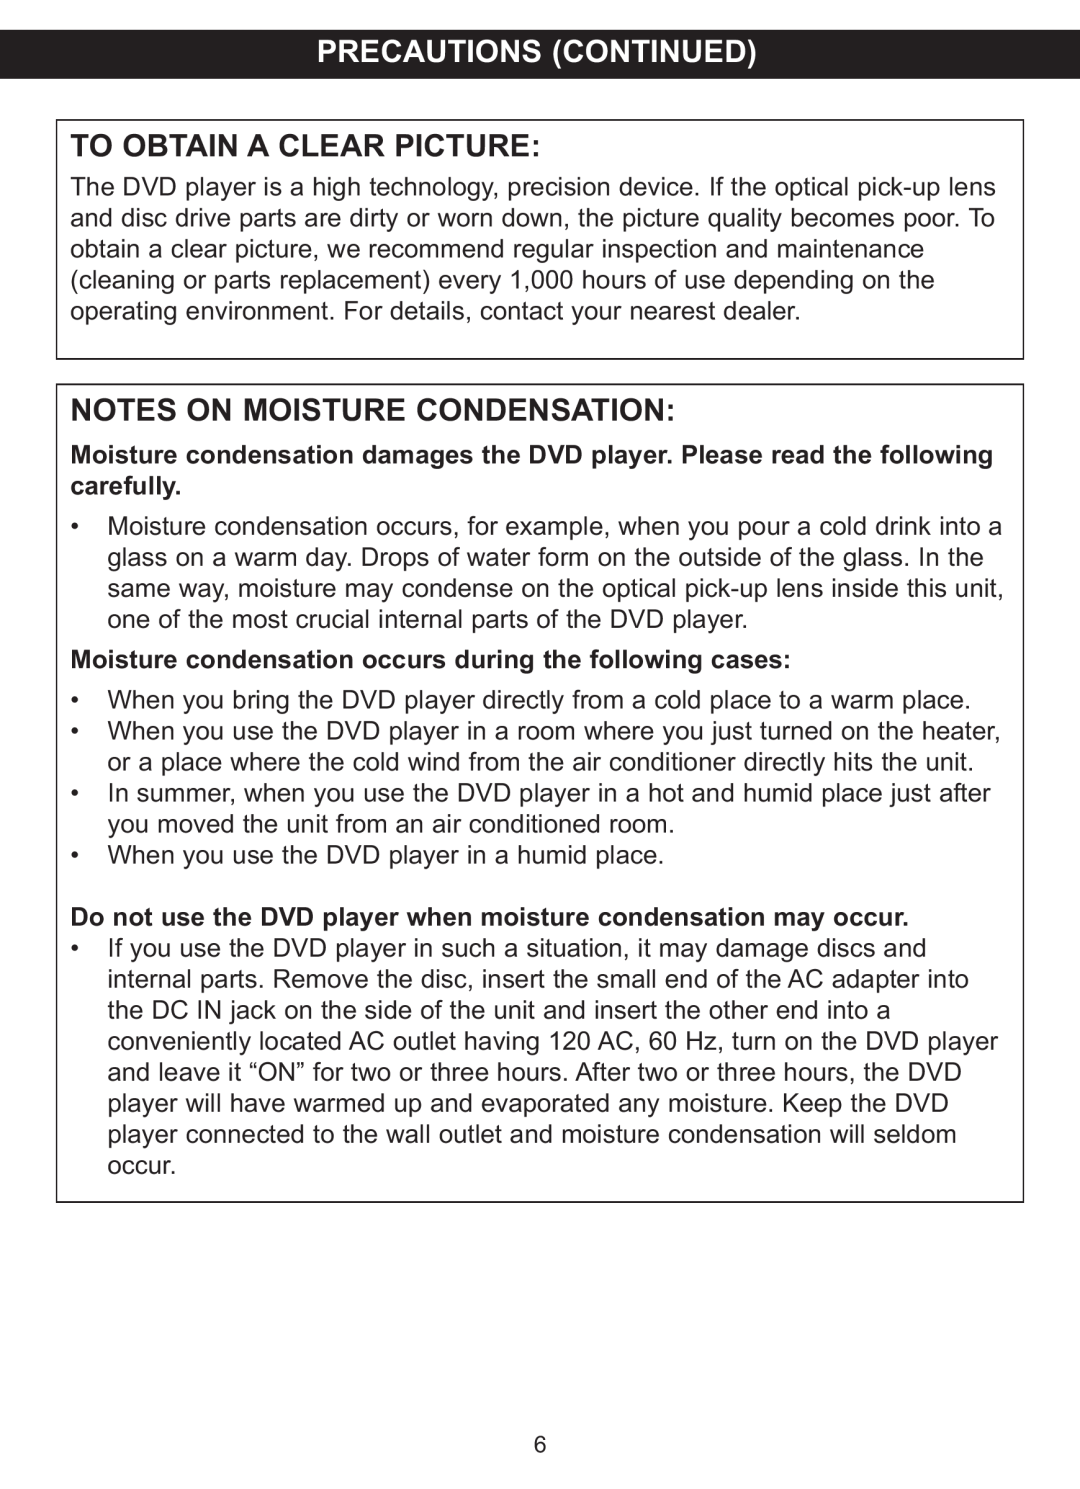 Memorex MVDP1088 manual Precautions Continued, To Obtain A Clear Picture, Notes On Moisture Condensation 